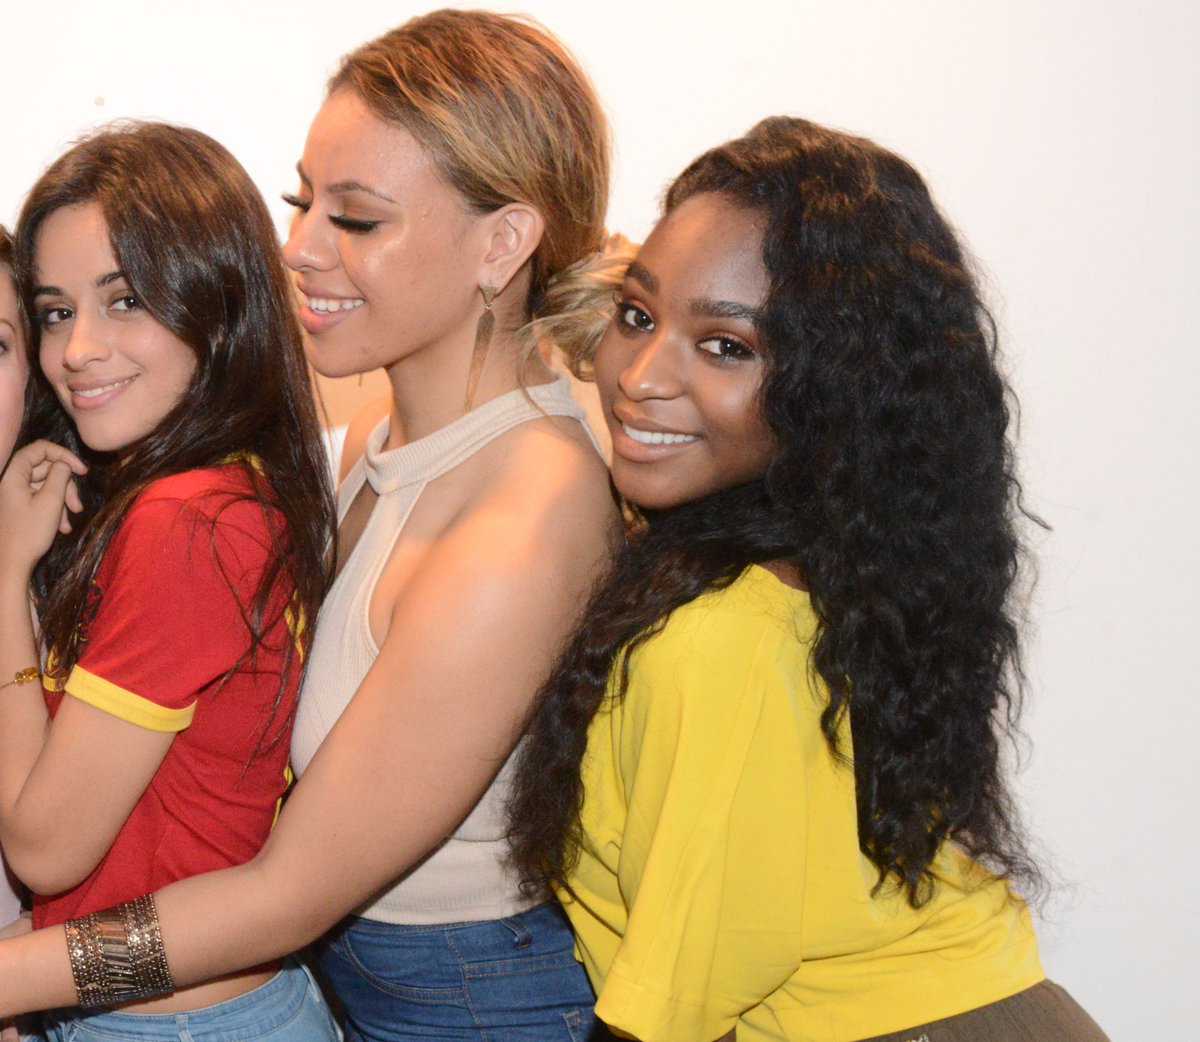 Camila, Dinah, and Normani in the Rochester Hills, Michigan meet and greet....